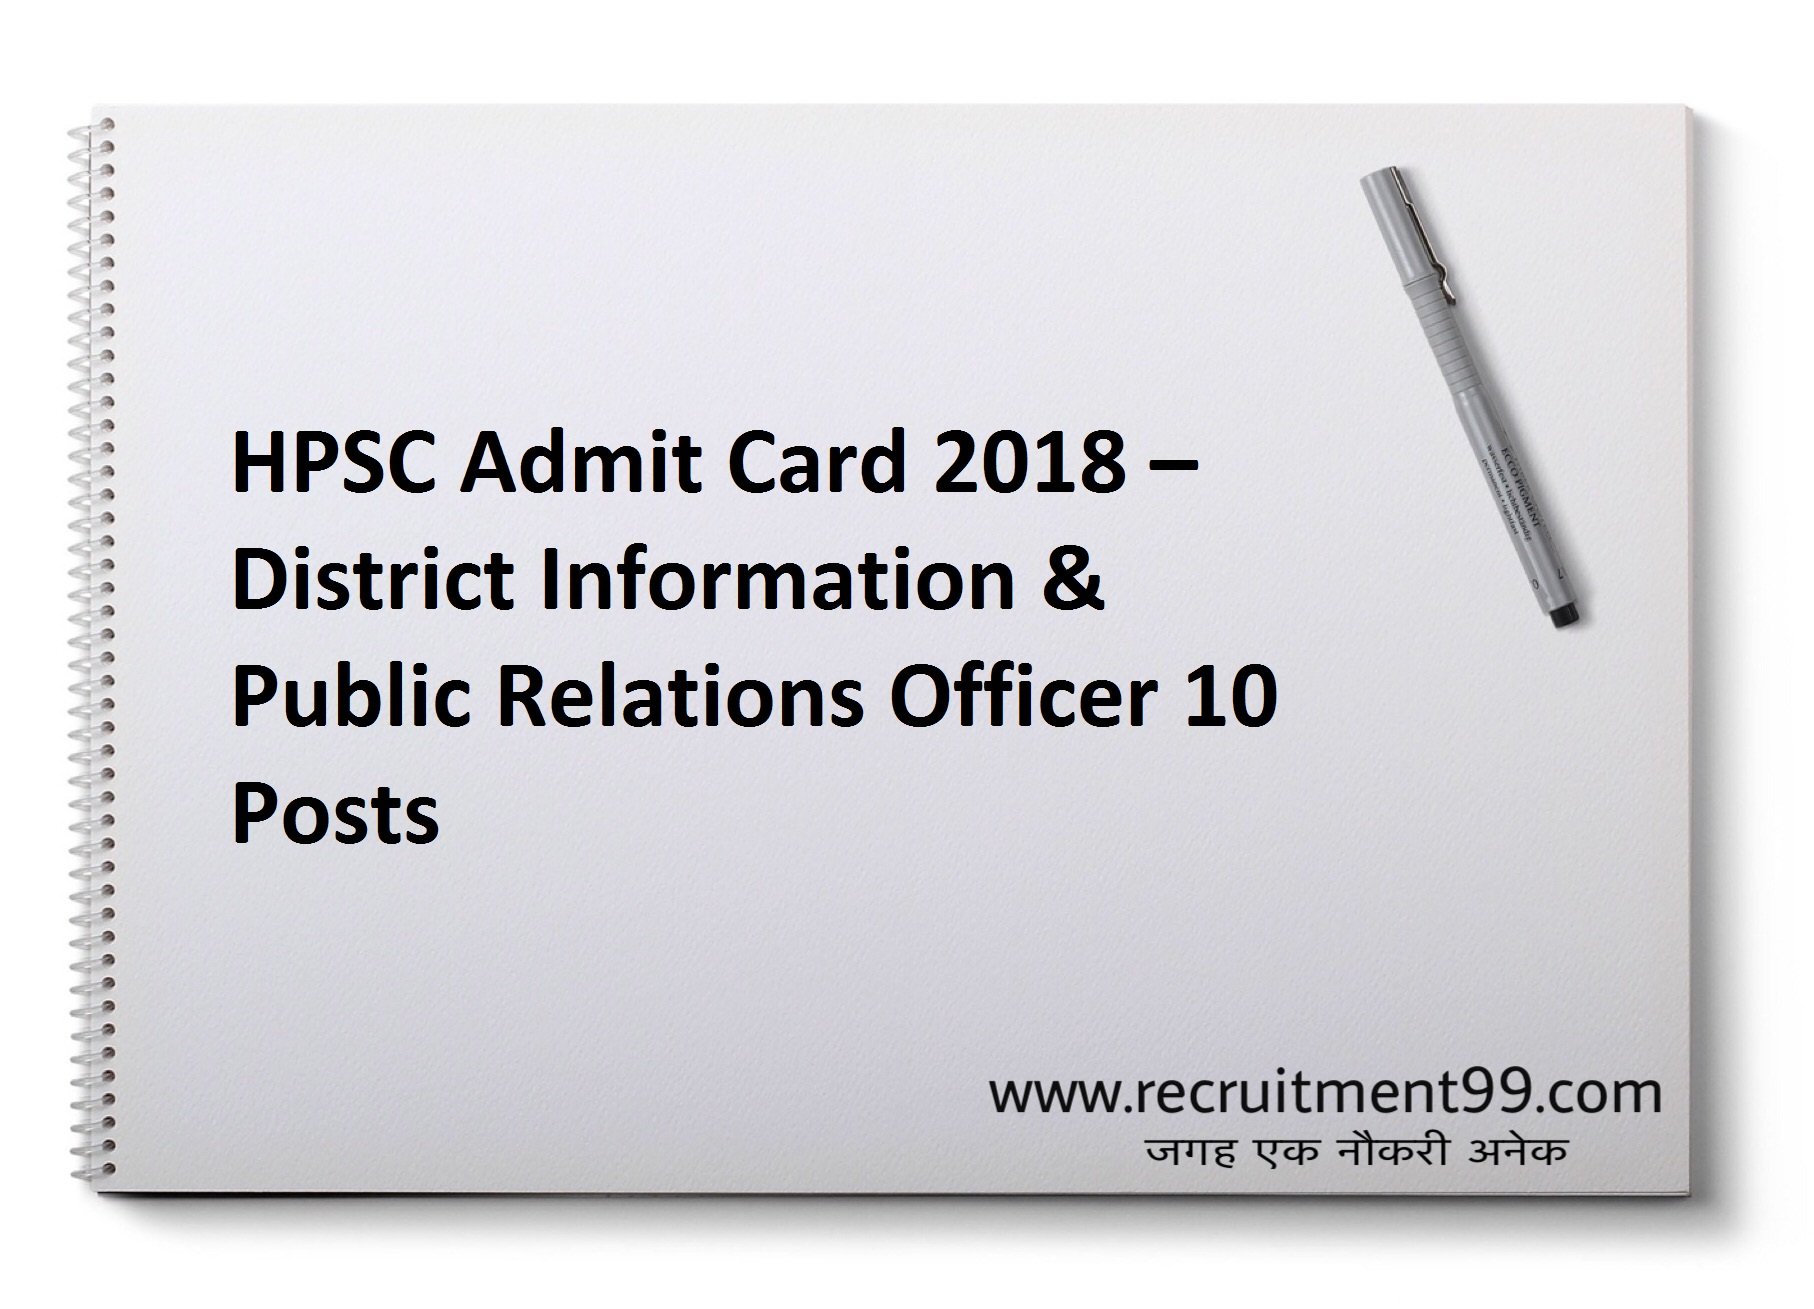 HPSC District Information & Public Relations Officer Recruitment Admit Card & Result 2018